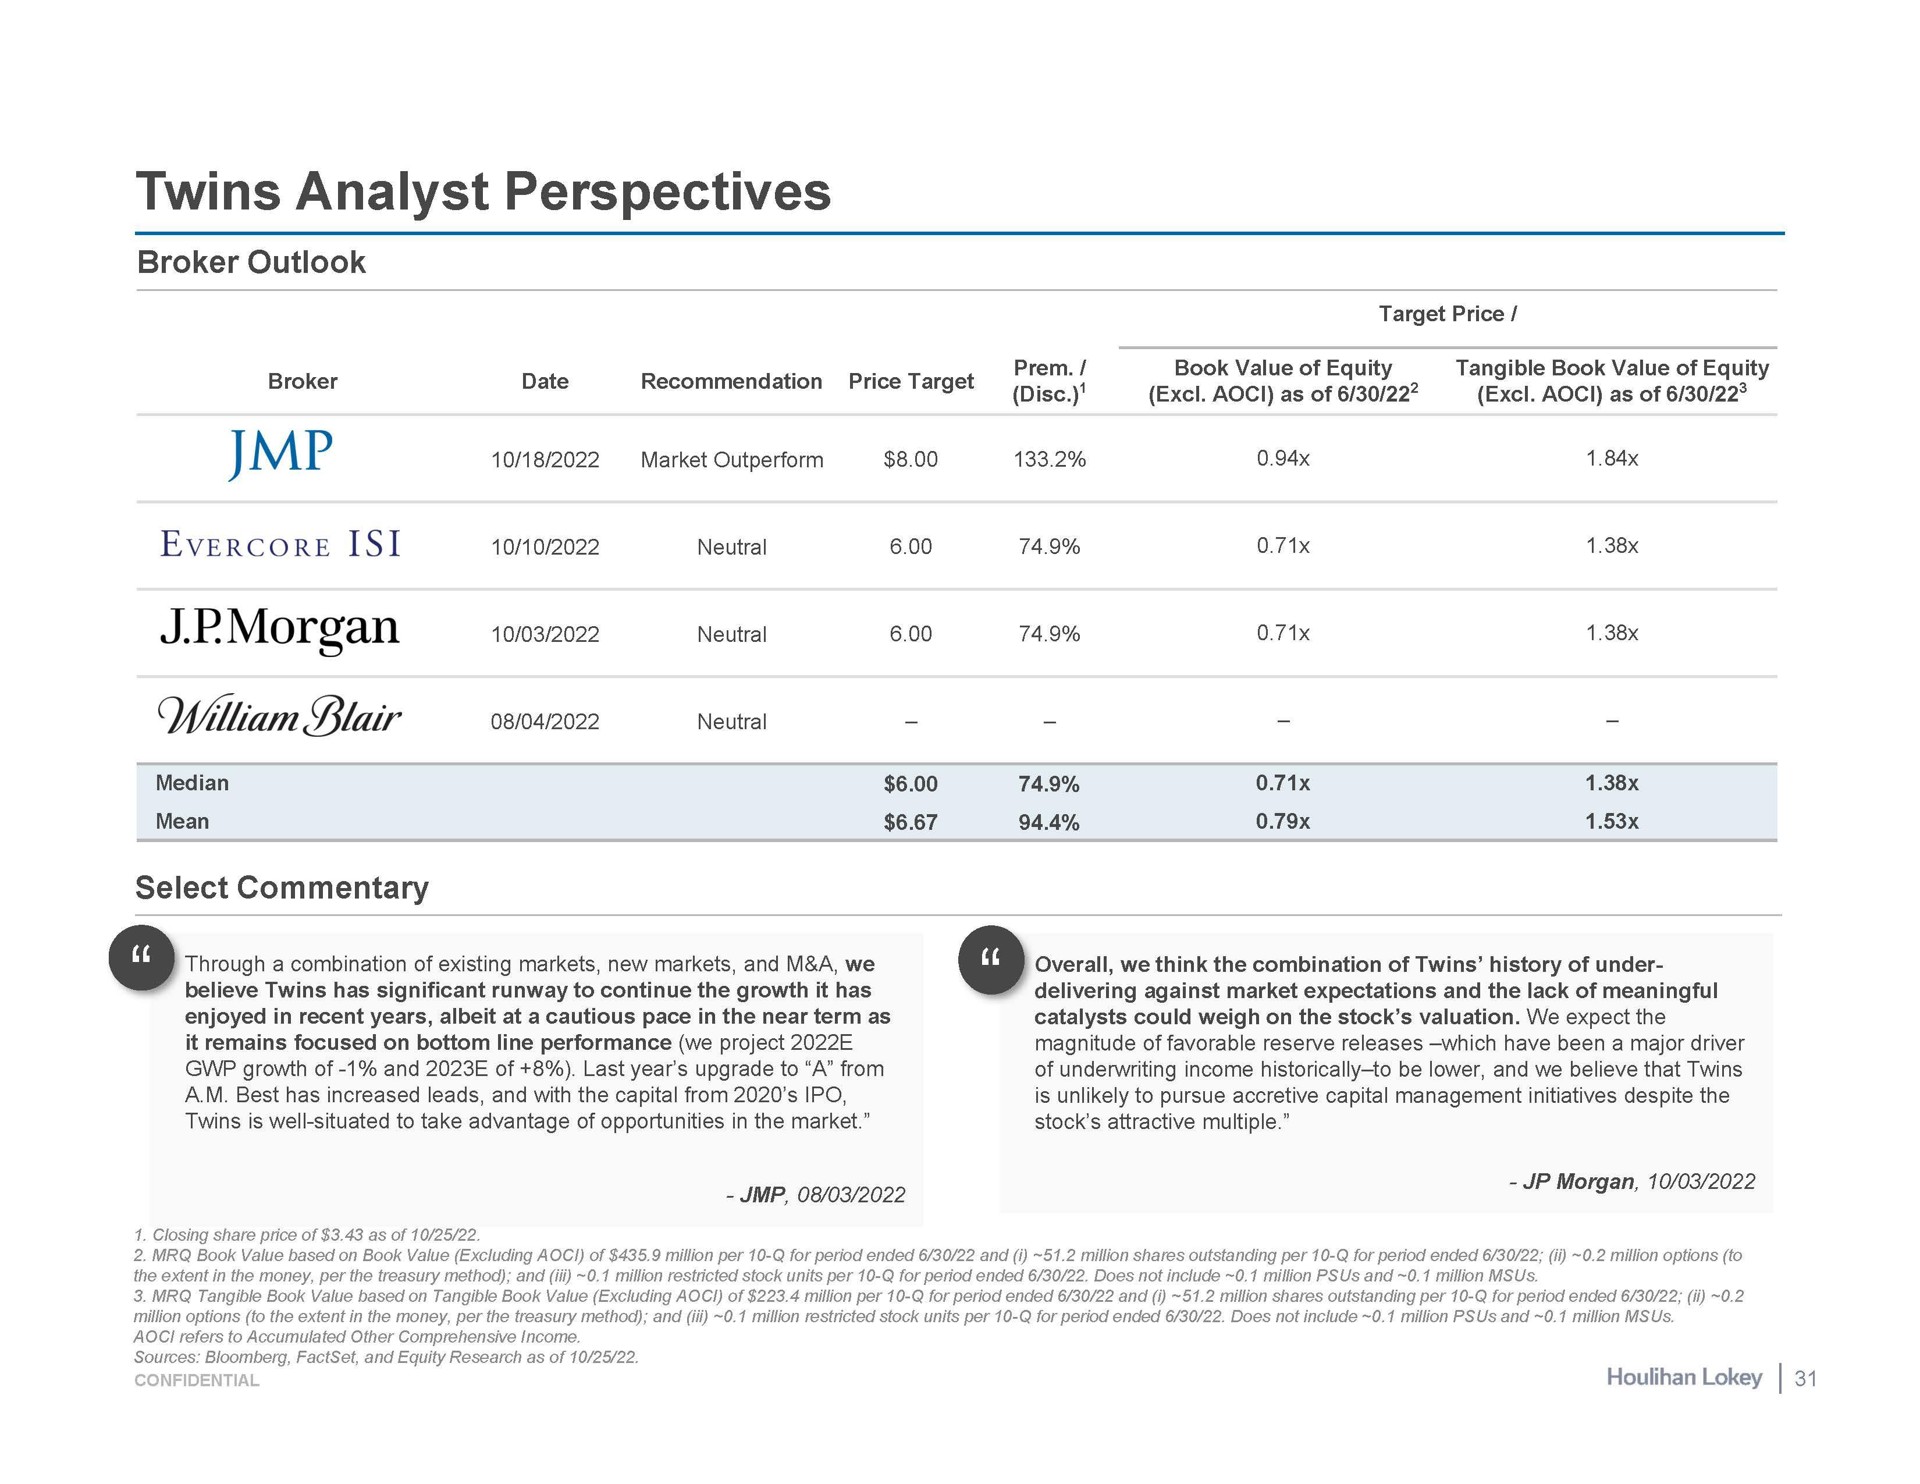 twins analyst perspectives broker date price target as of as of neutral lair neutral select commentary | Houlihan Lokey